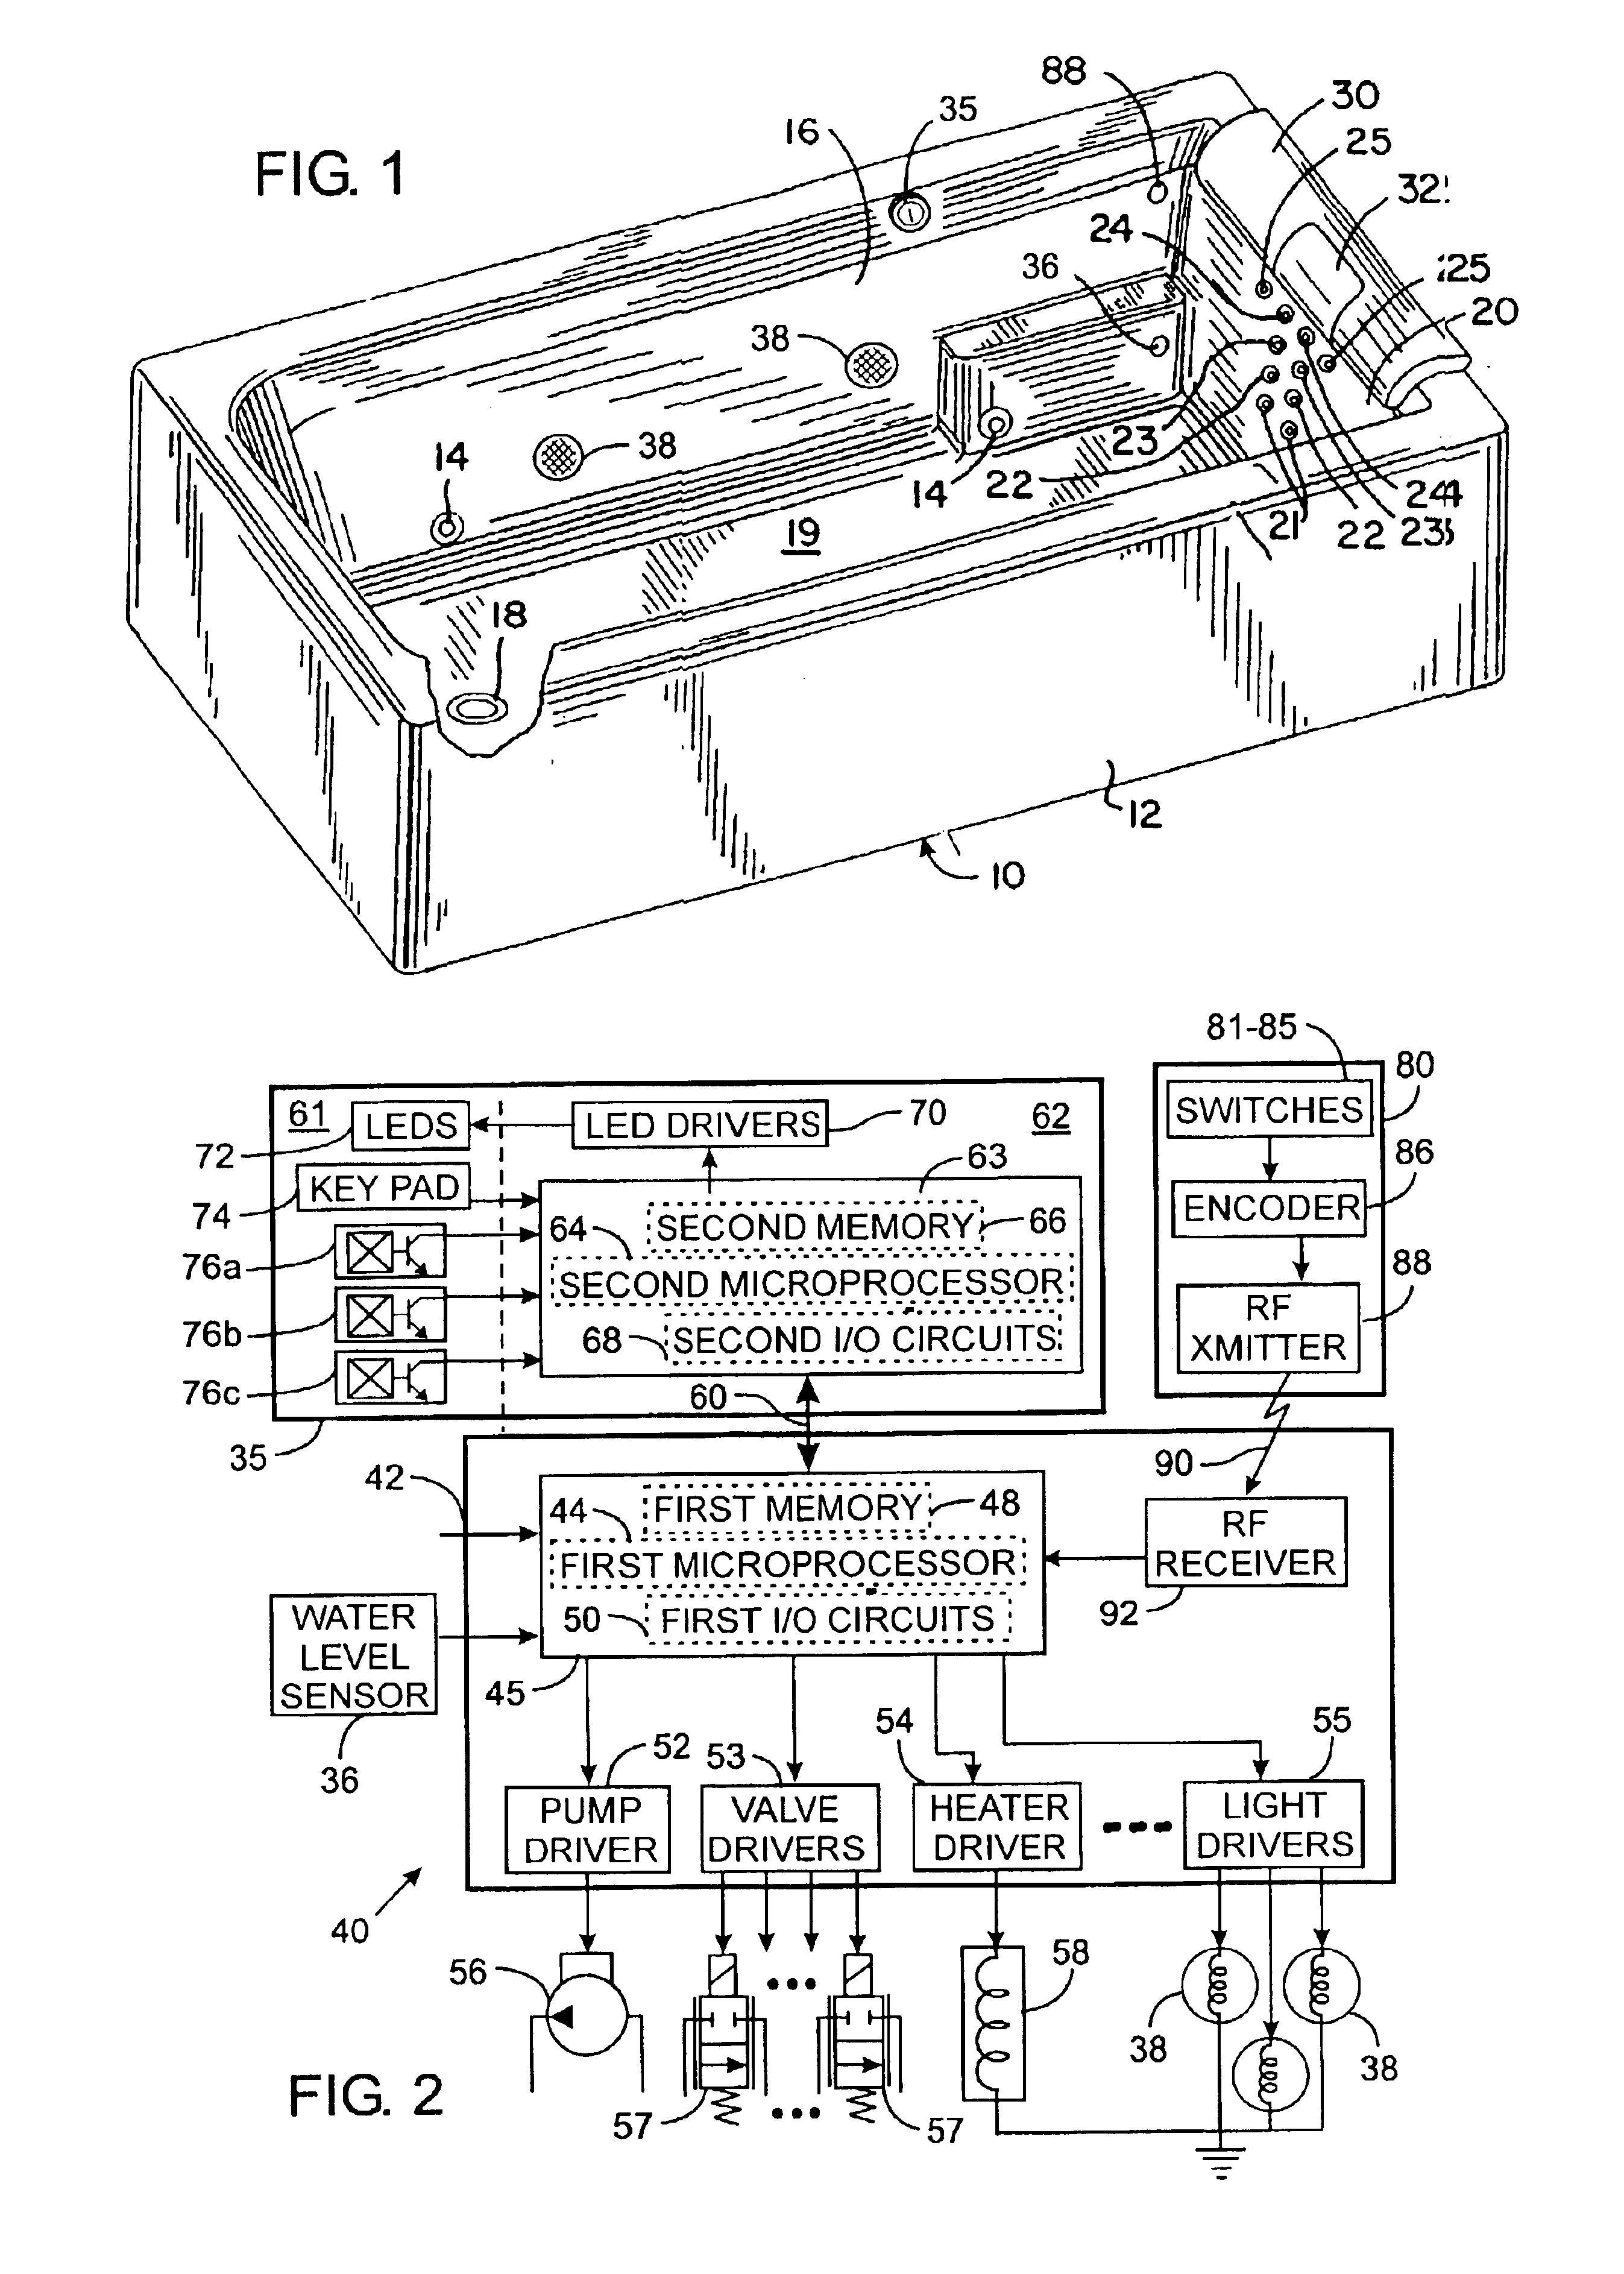 User interface for controlling a whirlpool tub